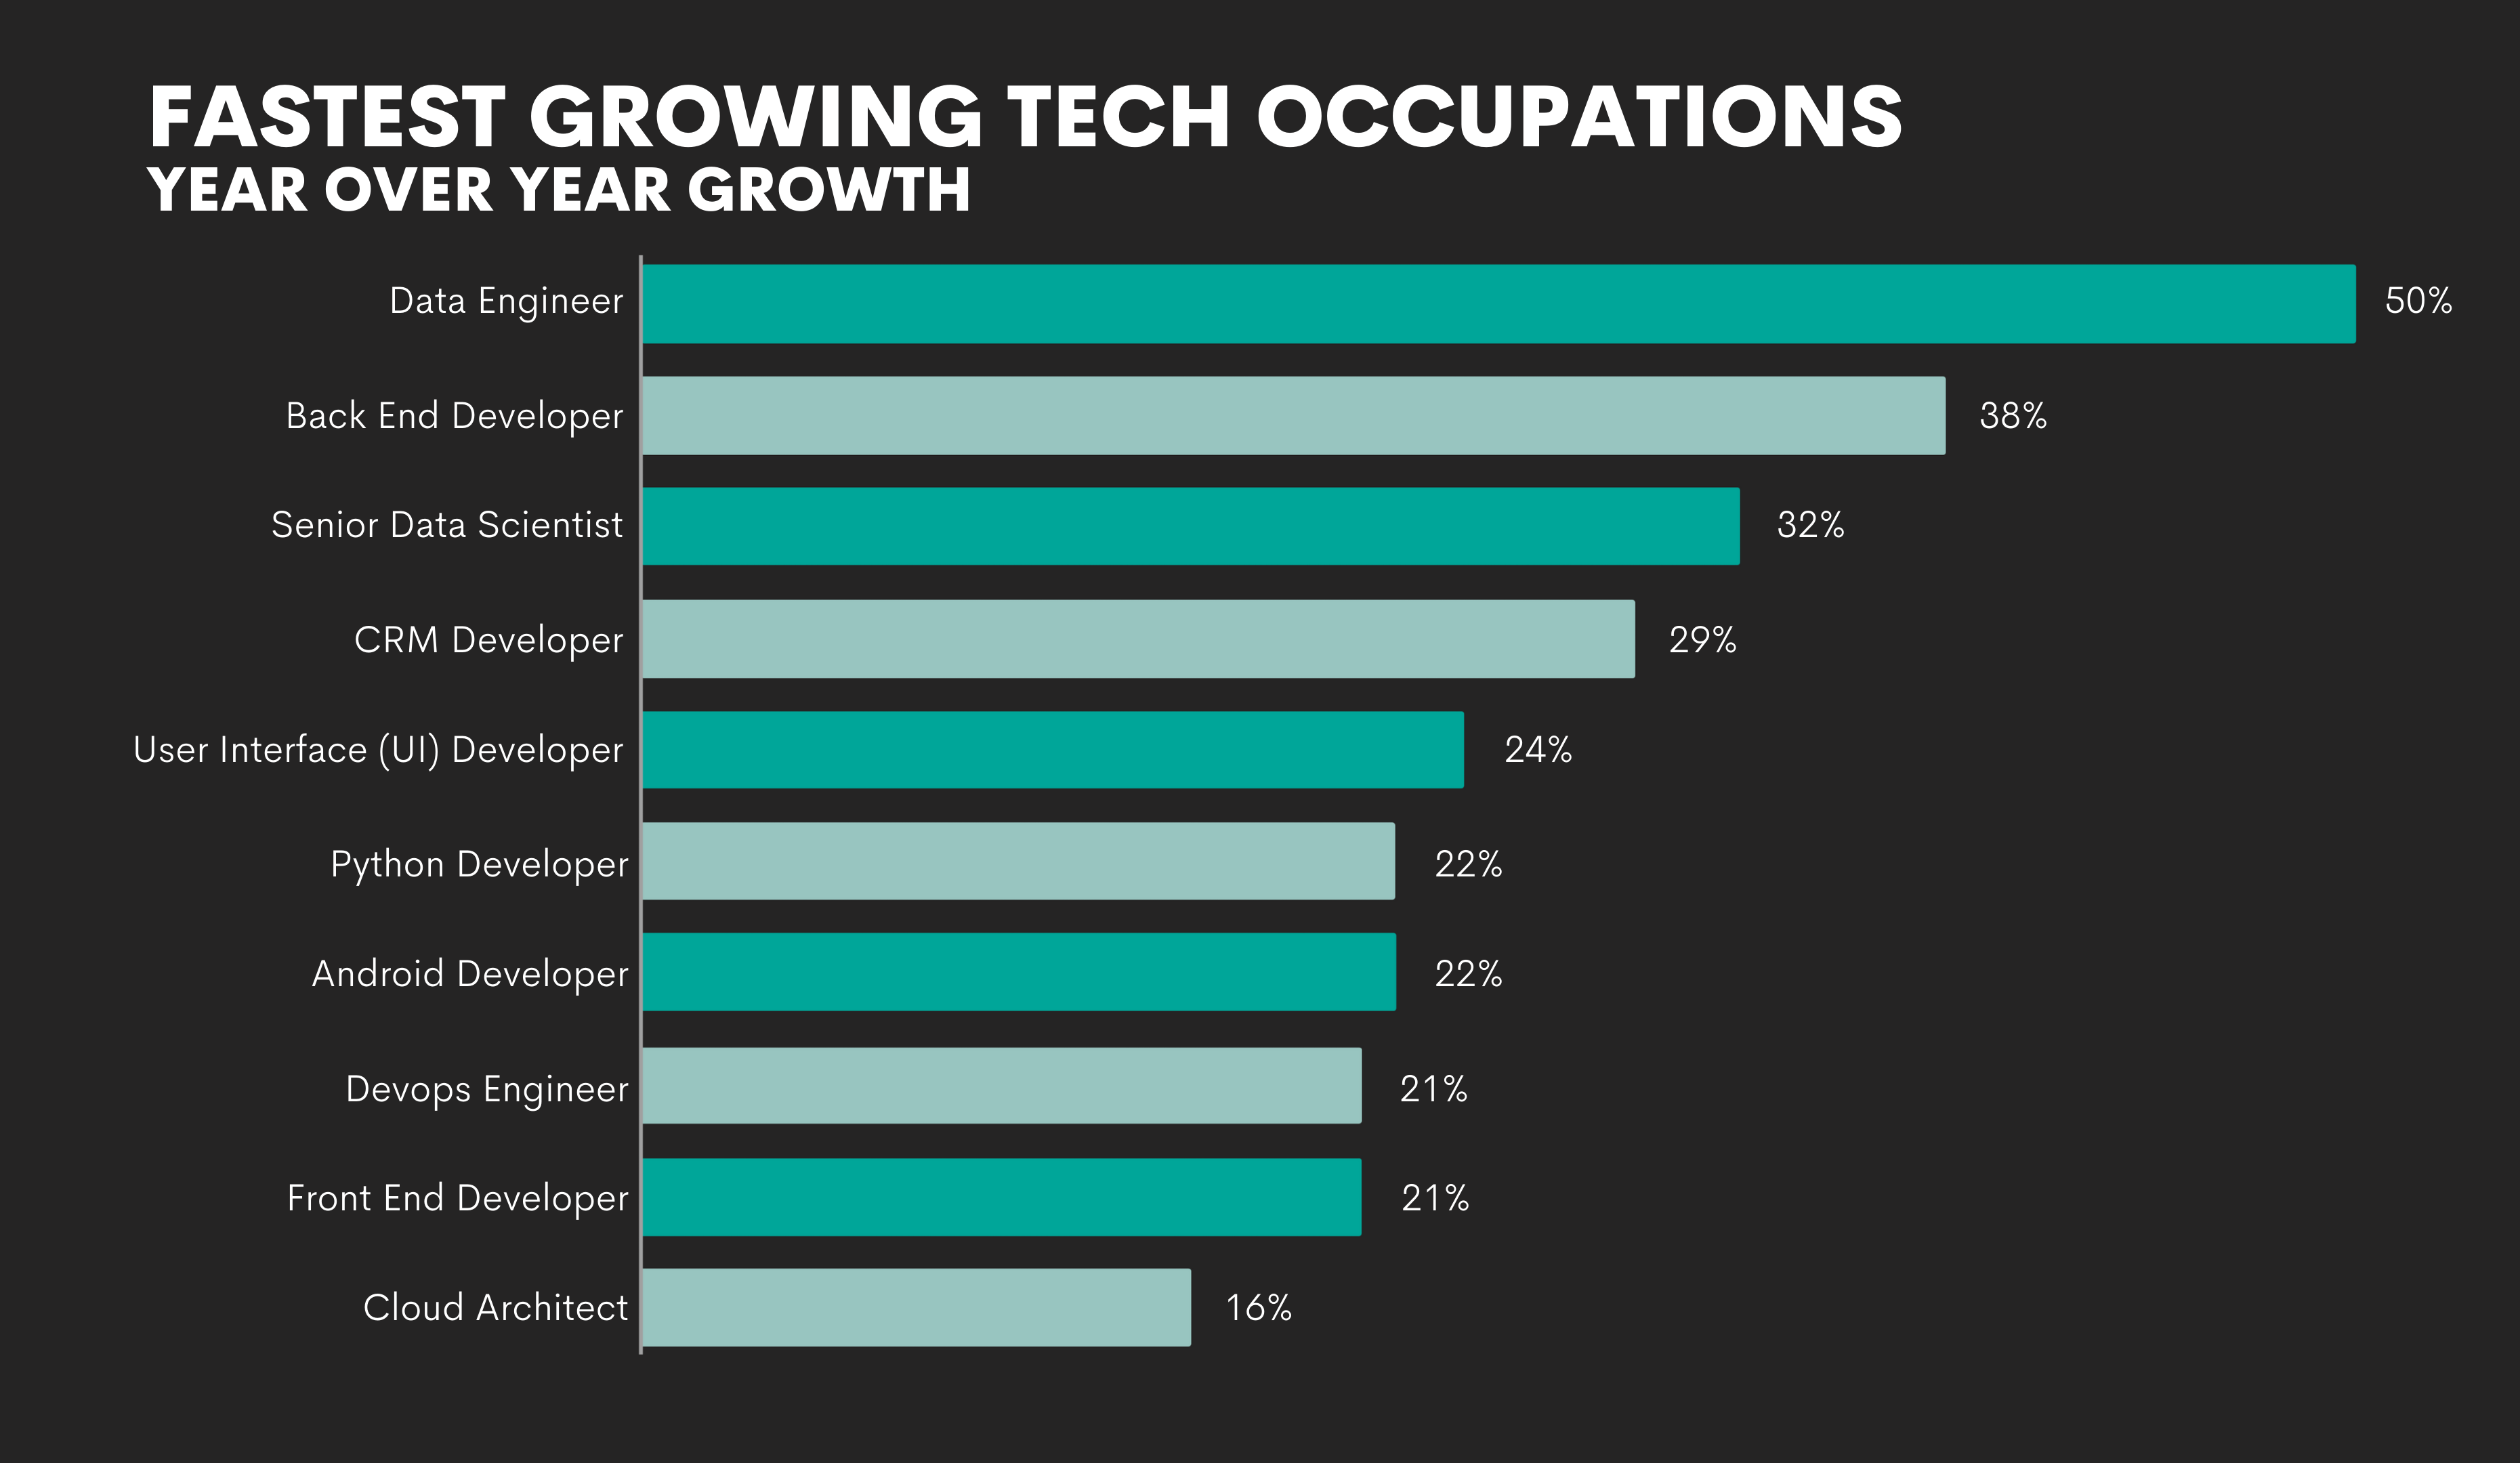 Fastest growing tech occupations